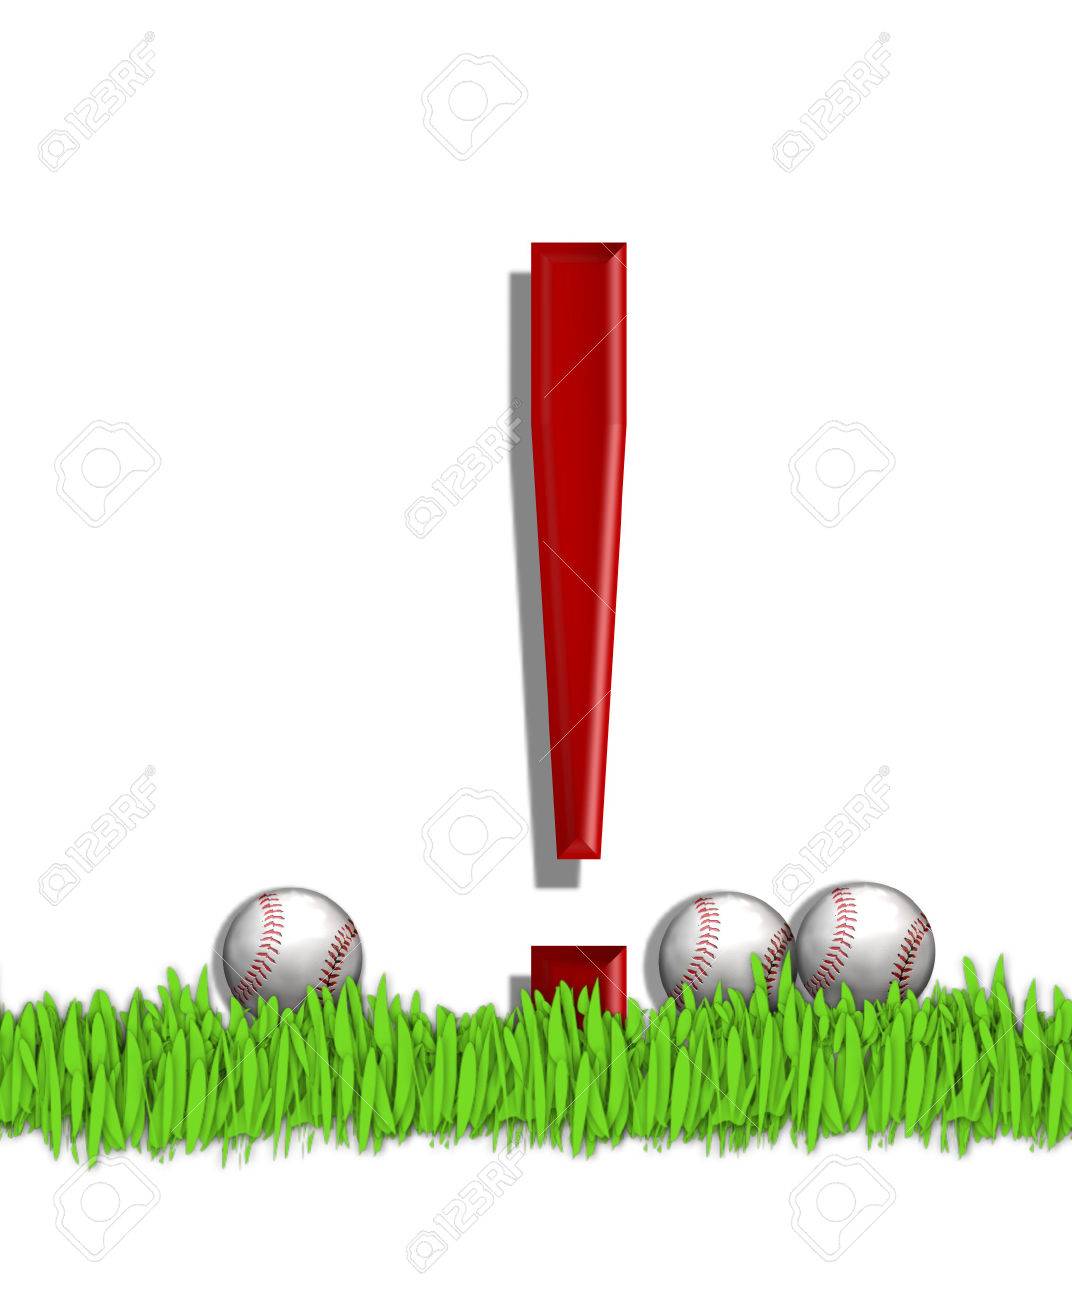 https://www.123rf.com/photo_25659071_exclamation-point-in-the-alphabet-set-baseball--is-red--three-baseballs-decorate-3d-letter--all-sit-.html